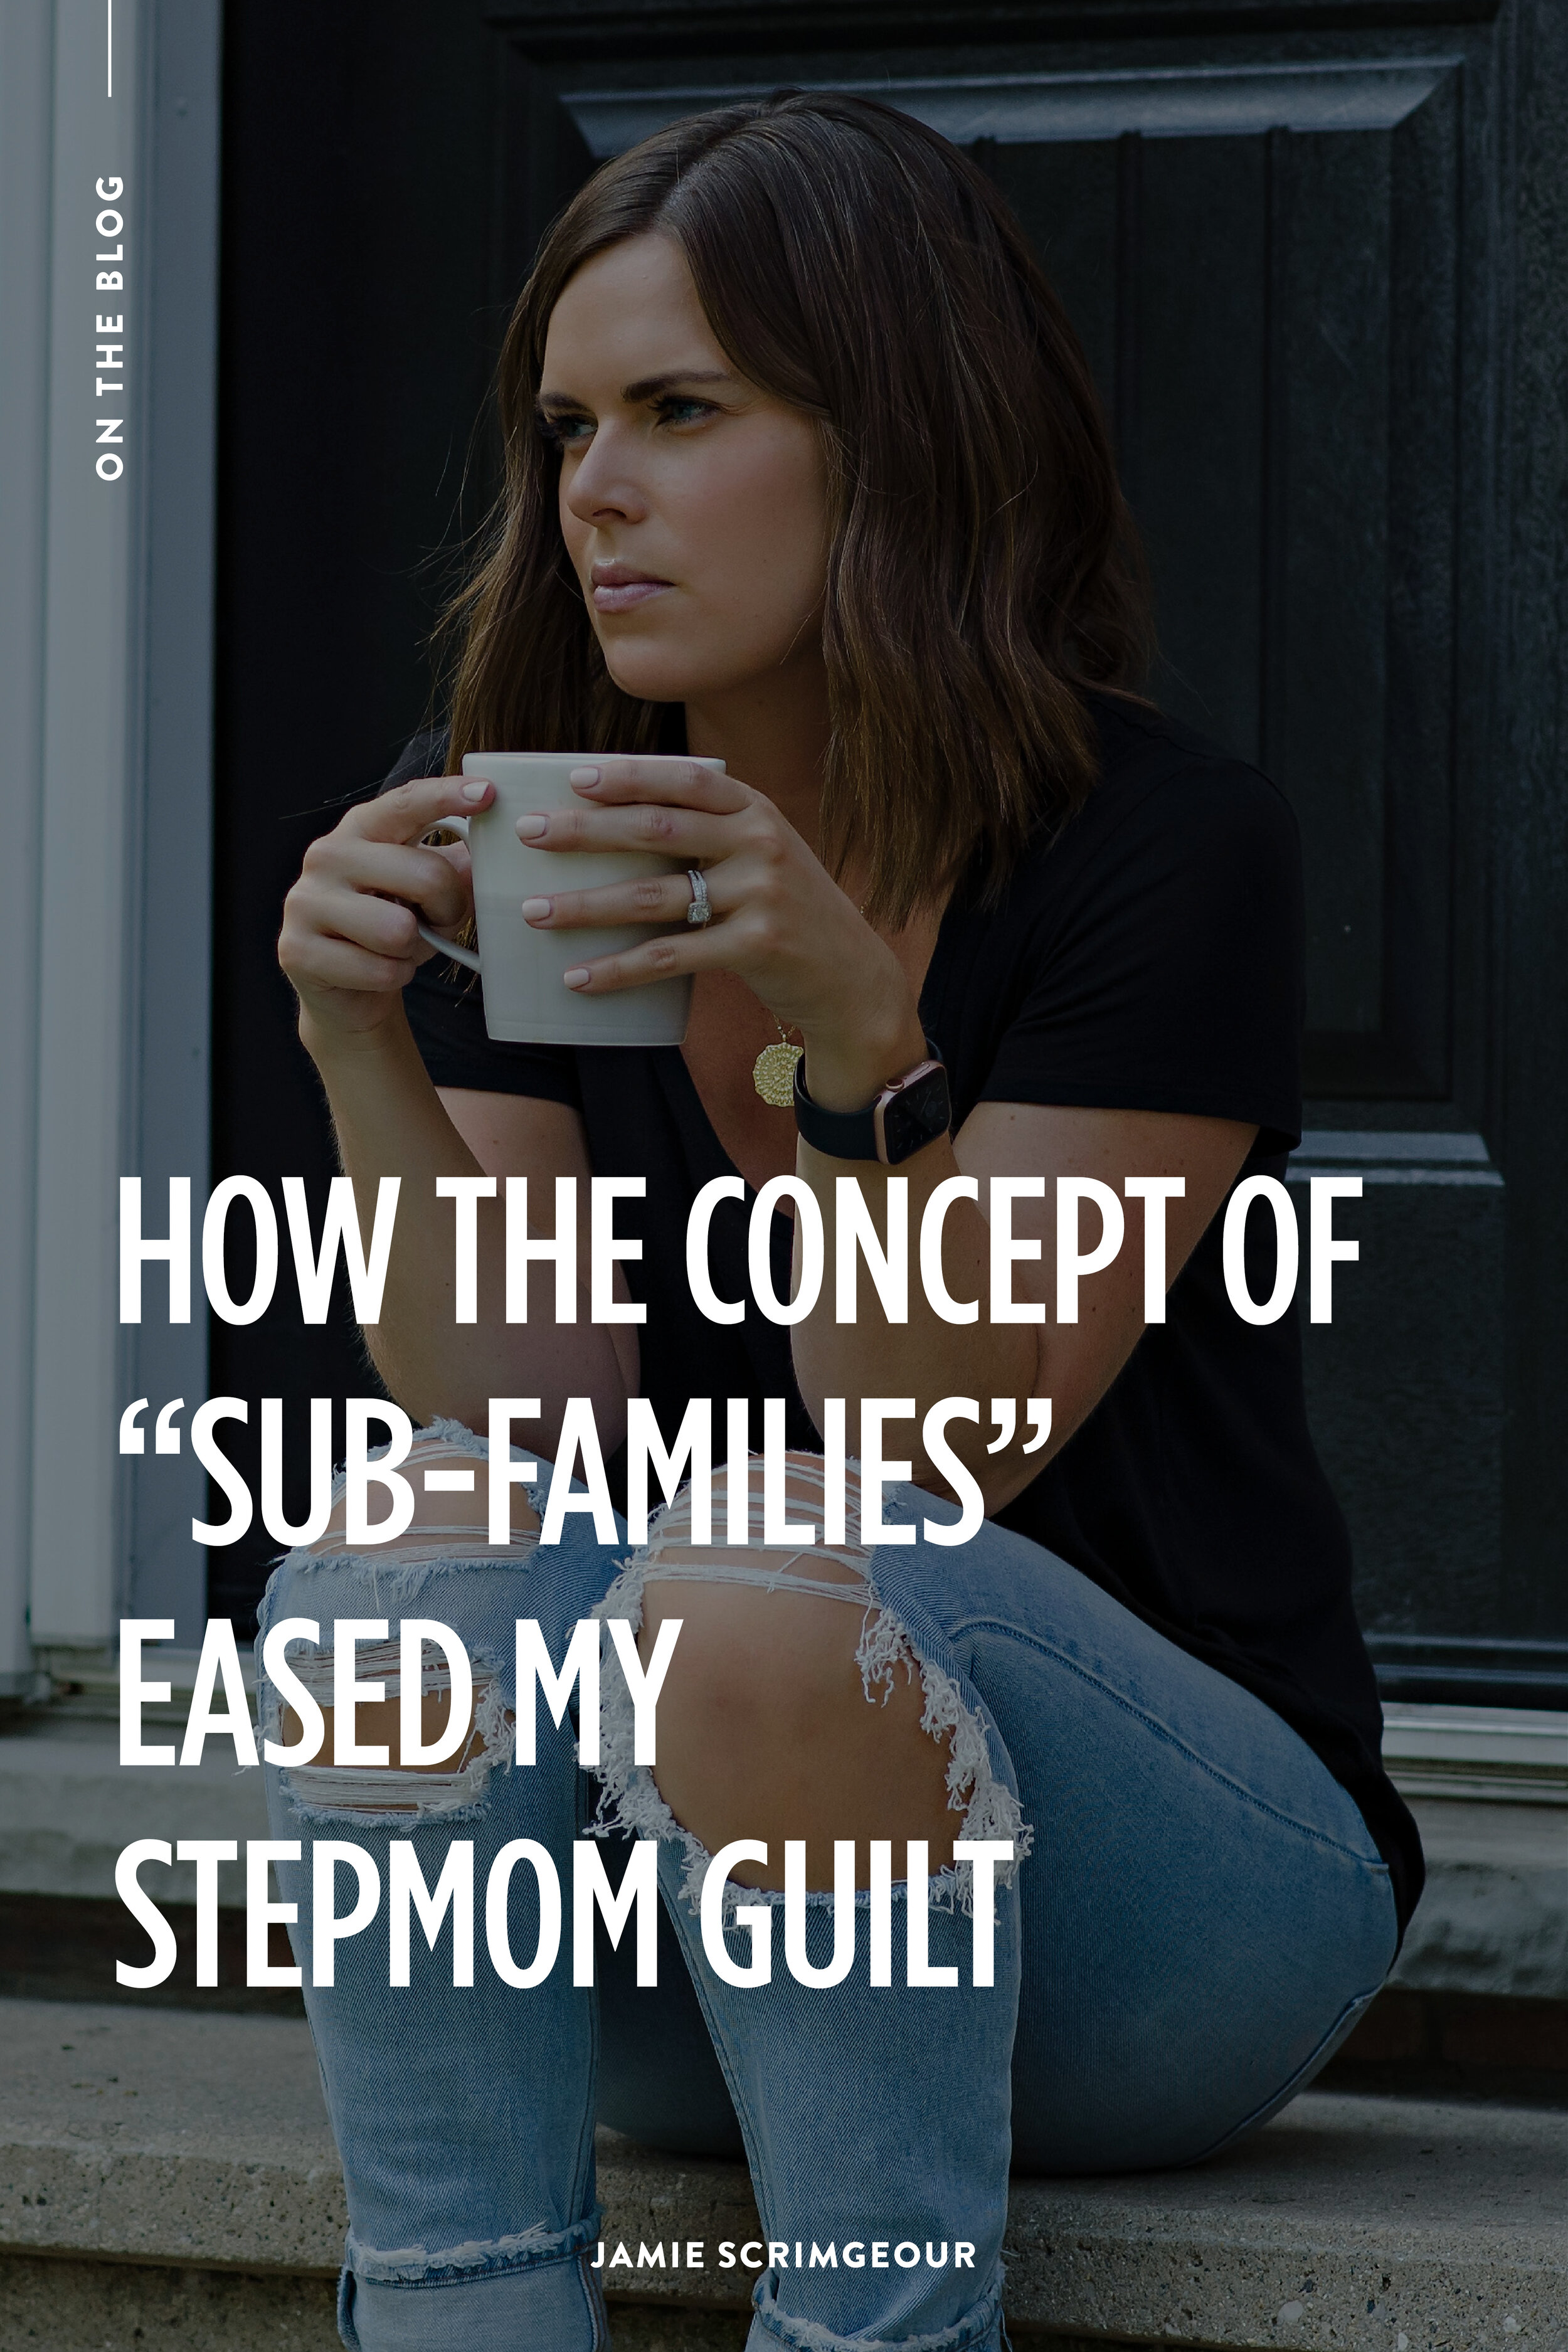 How The Concept Of Sub-Families Eased My Stepmom Guilt - Jamie Scrimgeour